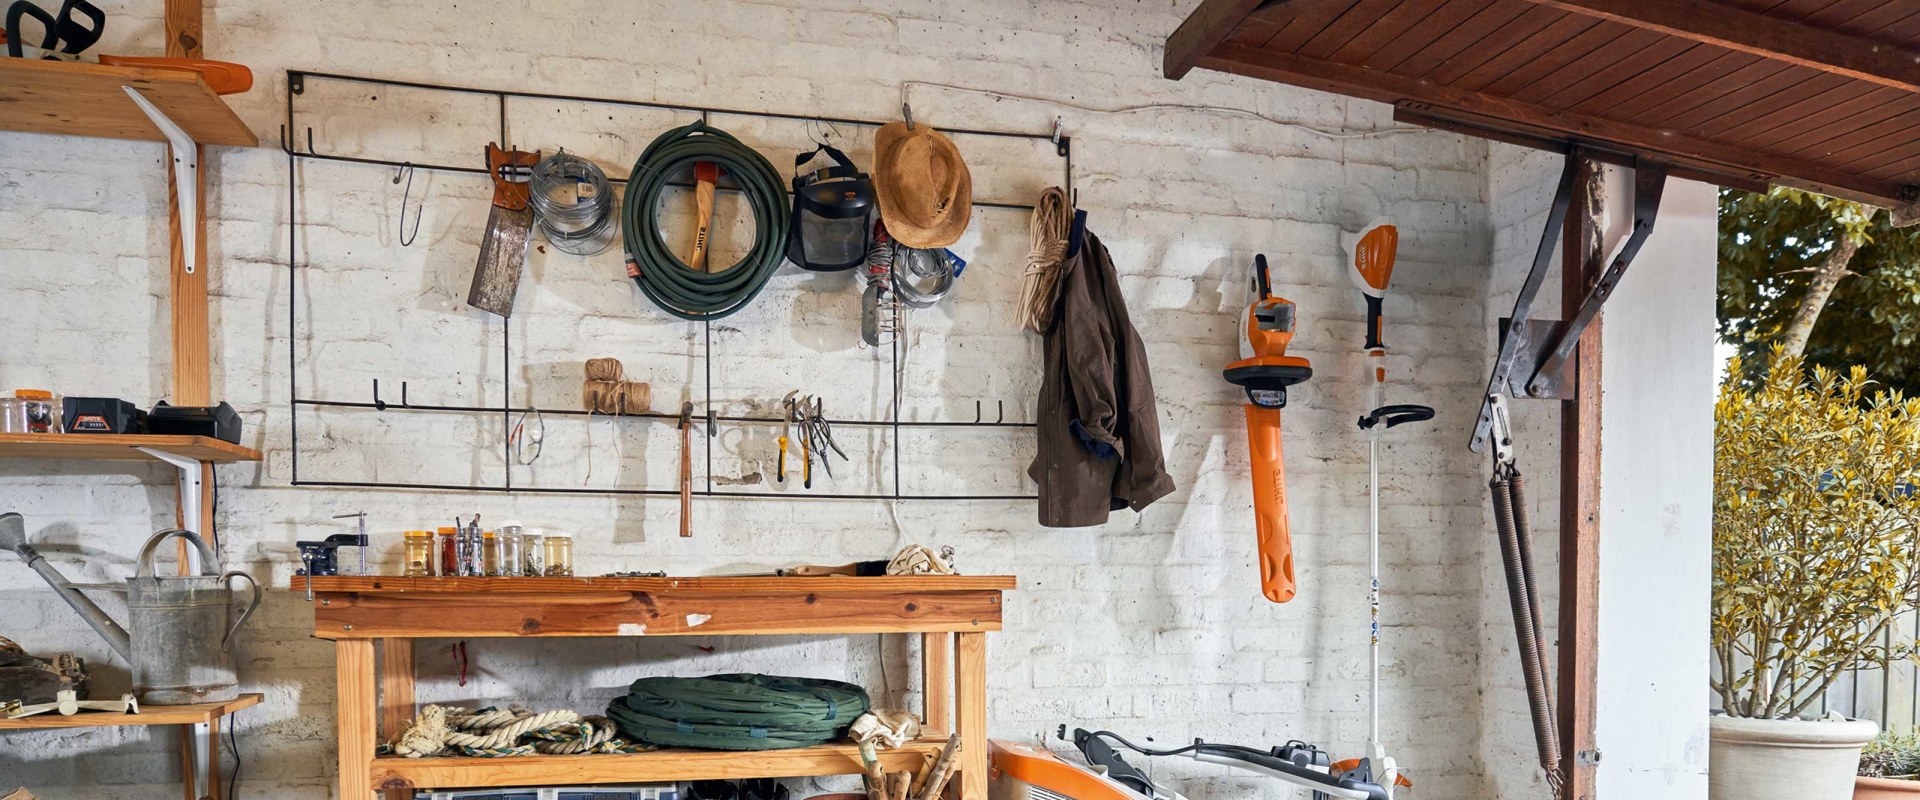 Why tools and equipment should be stored properly?